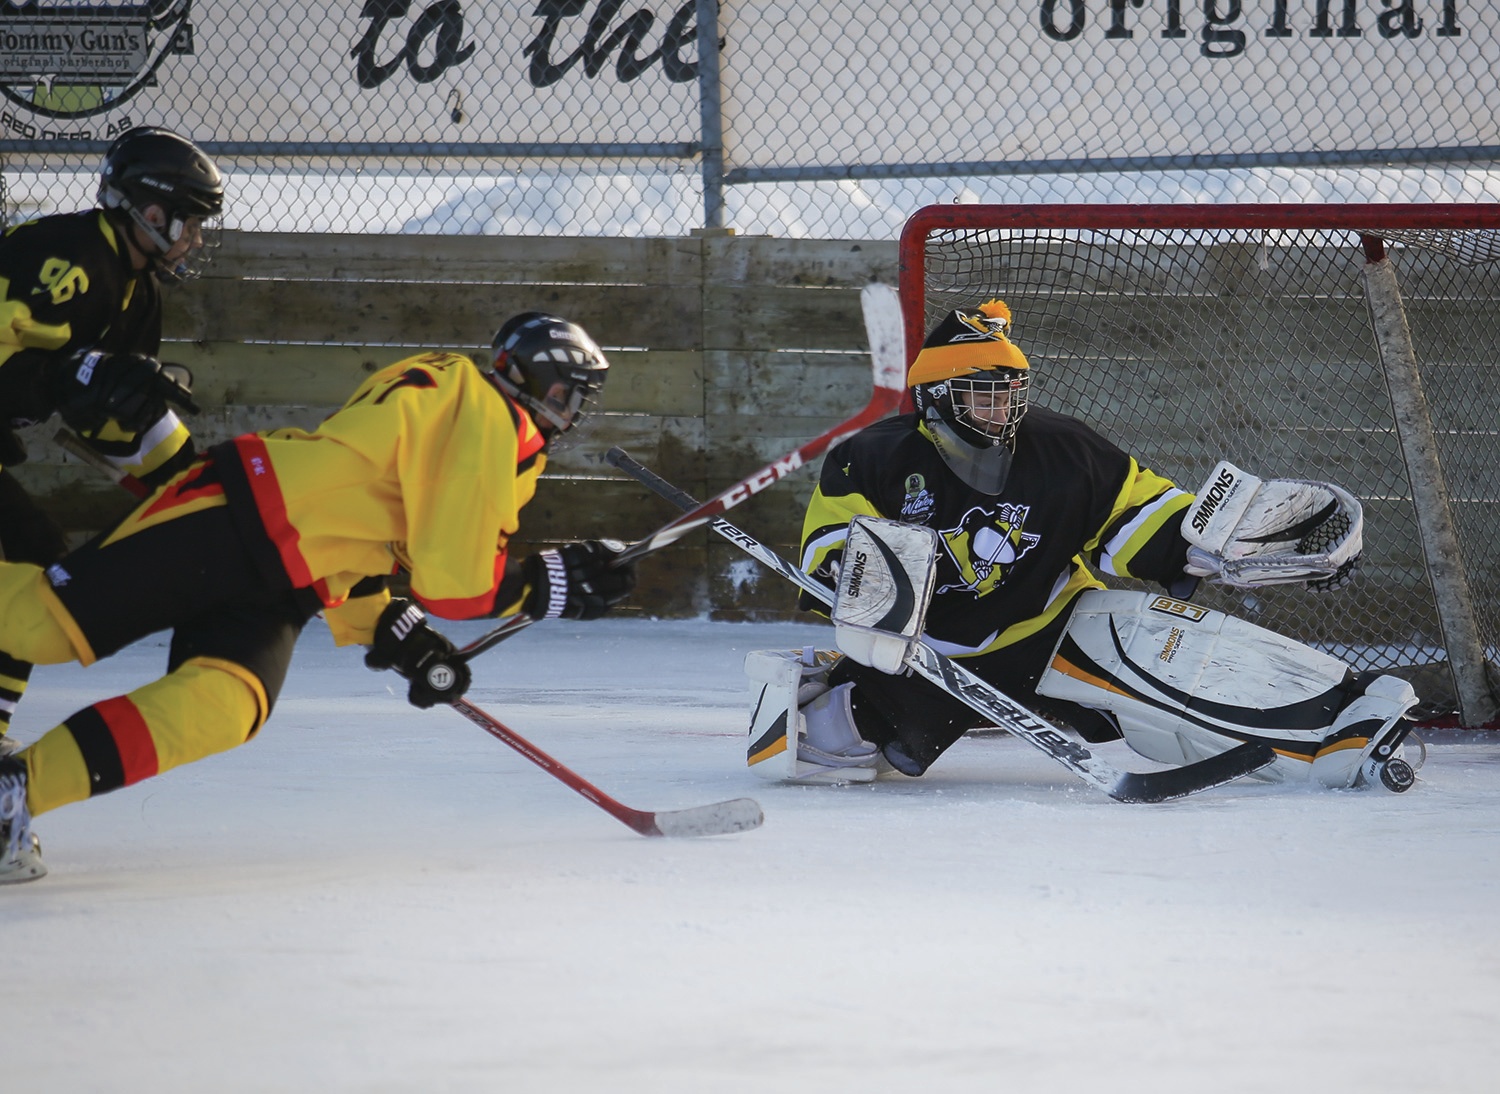 SWEET SAVE - Goaltender Gord Bennett of the Spruce Grove Penguins stopped a shot by Zac Powell of the Red Deer Canucks during the Tommy Gun’s Winter Classic at the Bower Community Rinks on Saturday. The annual outdoor tournament wrapped up its sixth successful year last weekend.